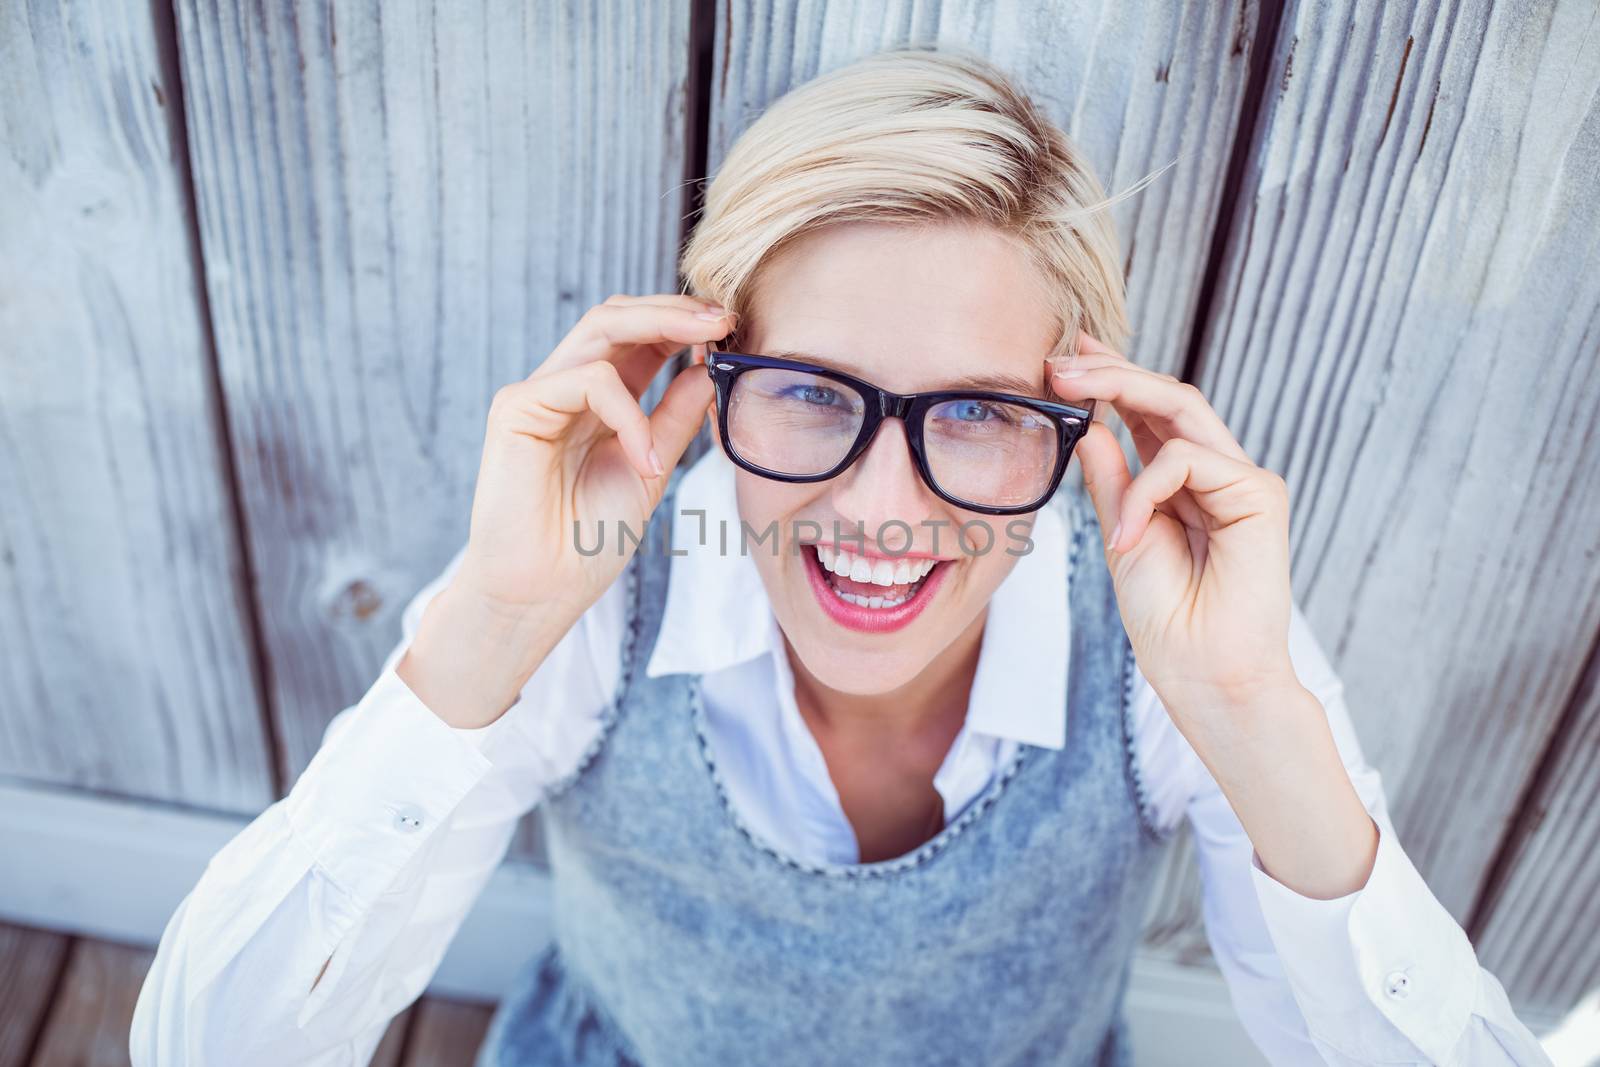 Pretty blonde woman smiling at the camera on wooden background